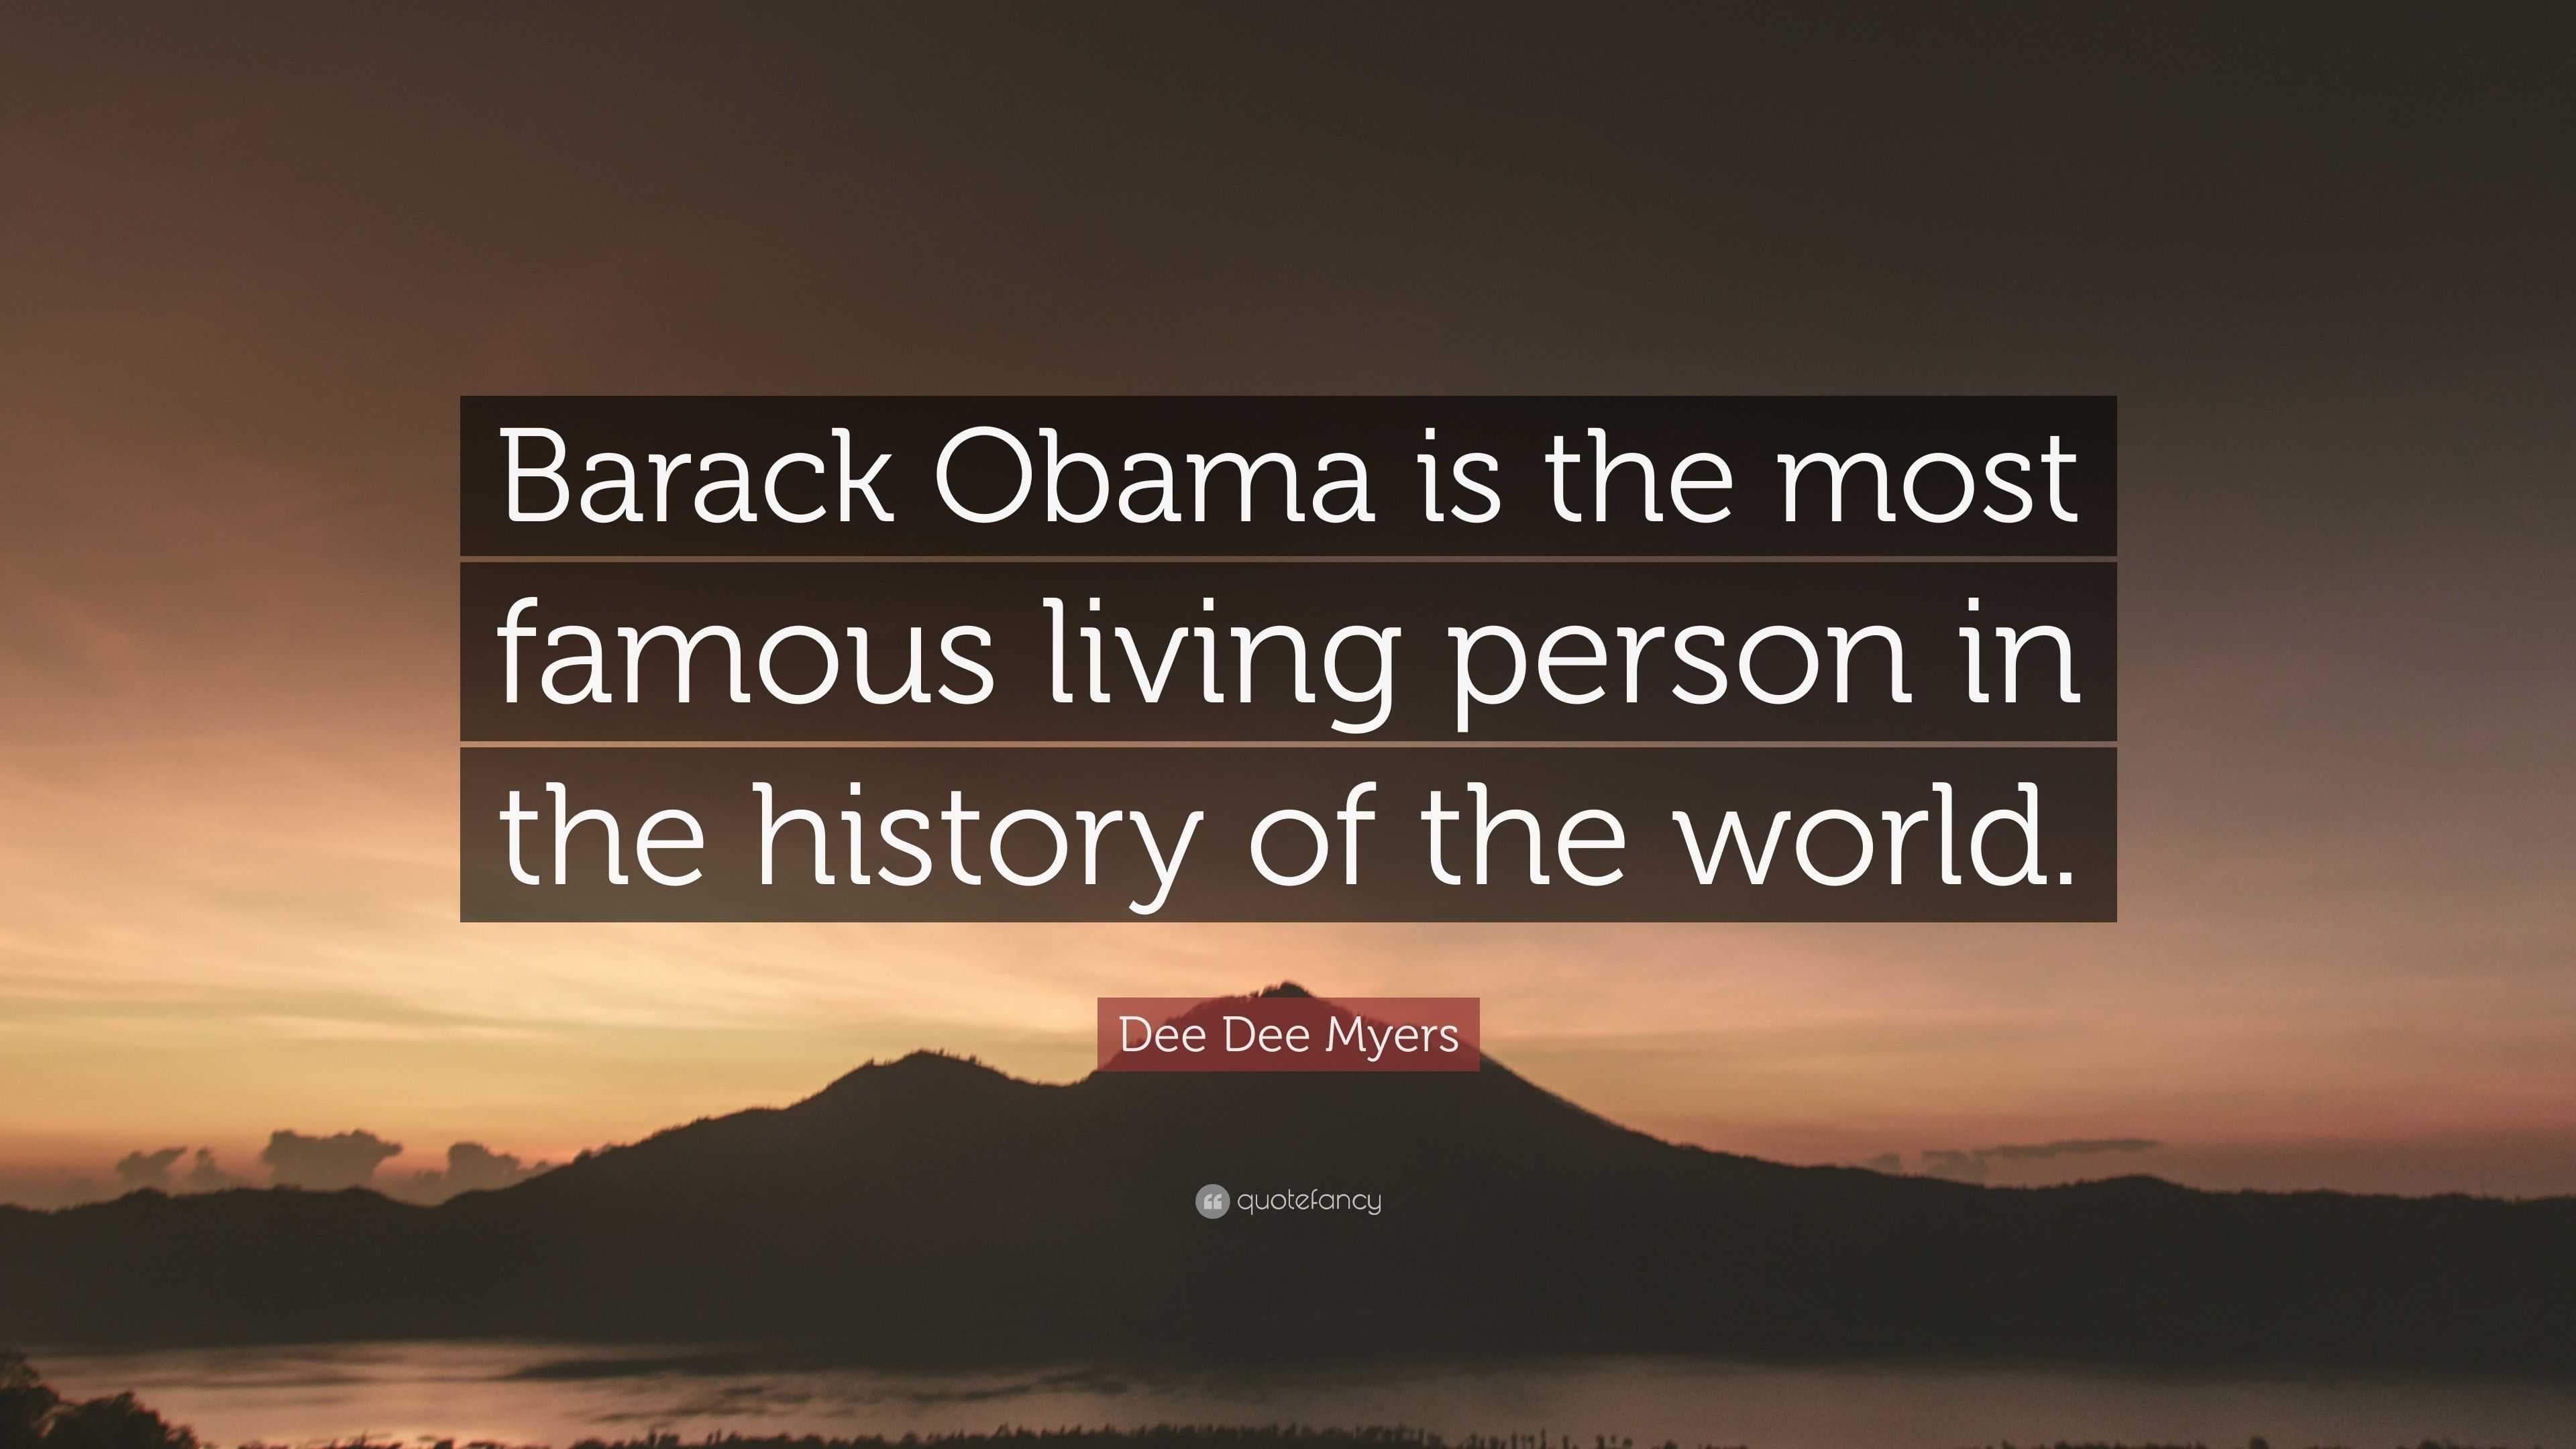 Is Obama the Most Famous Living Person Ever?